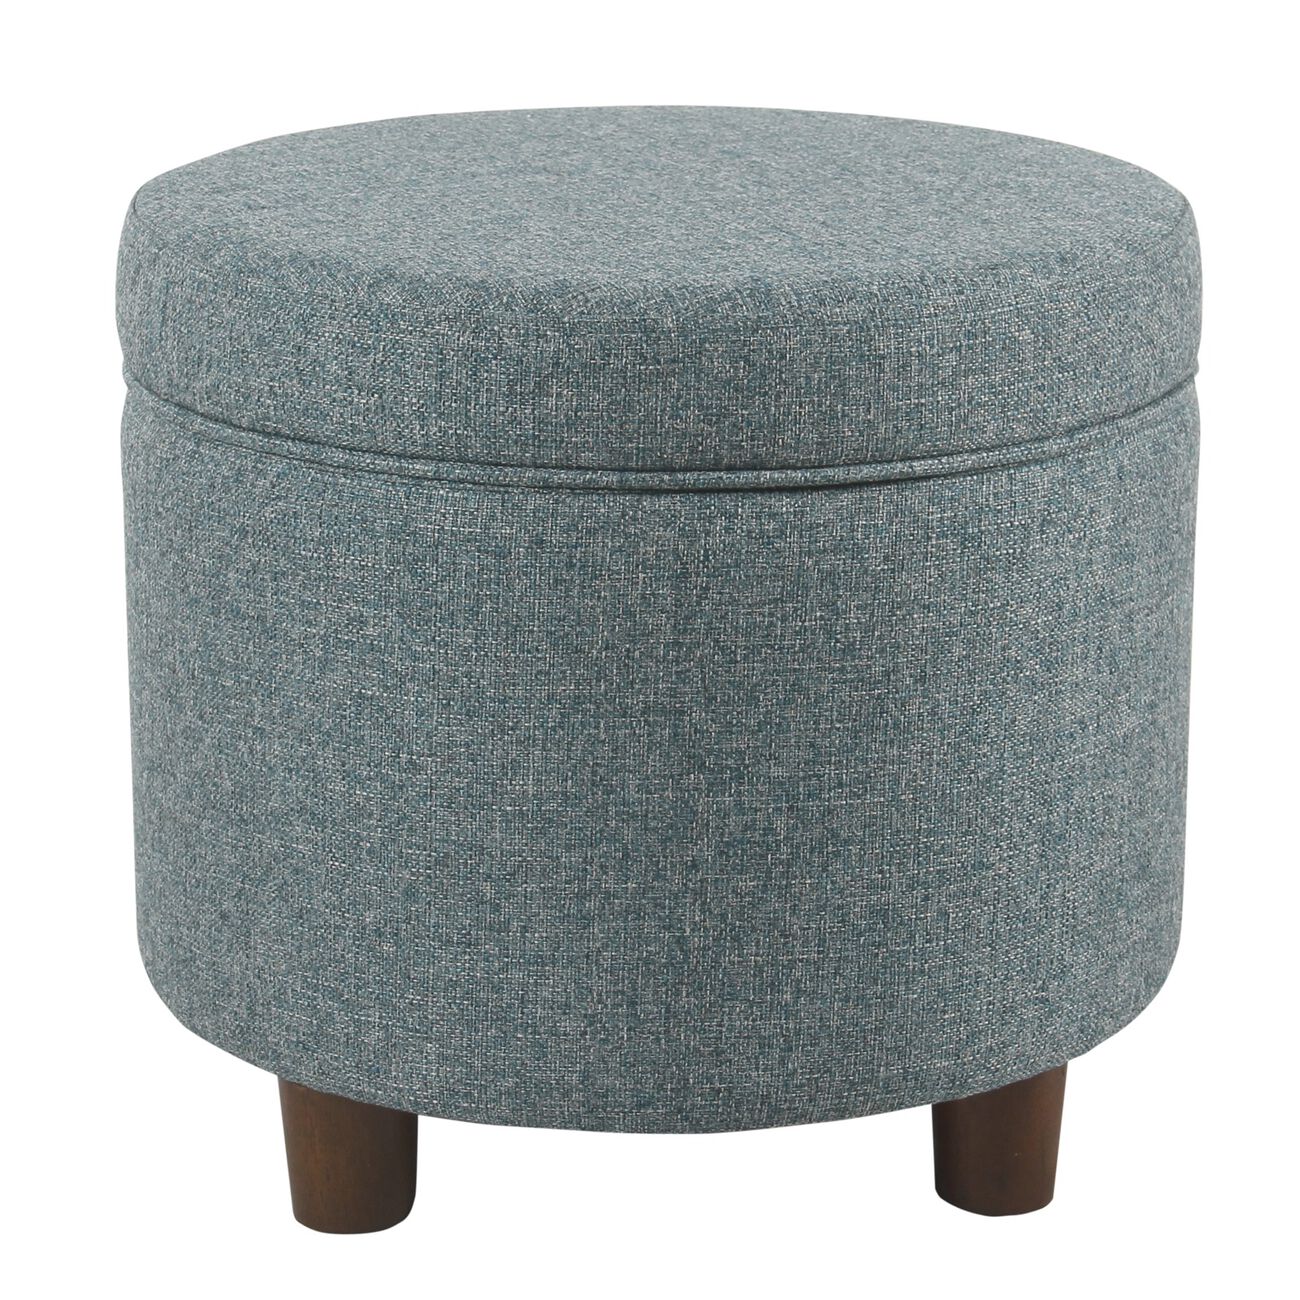 Fabric Upholstered Round Wooden Ottoman with Lift Off Lid Storage, Teal Blue